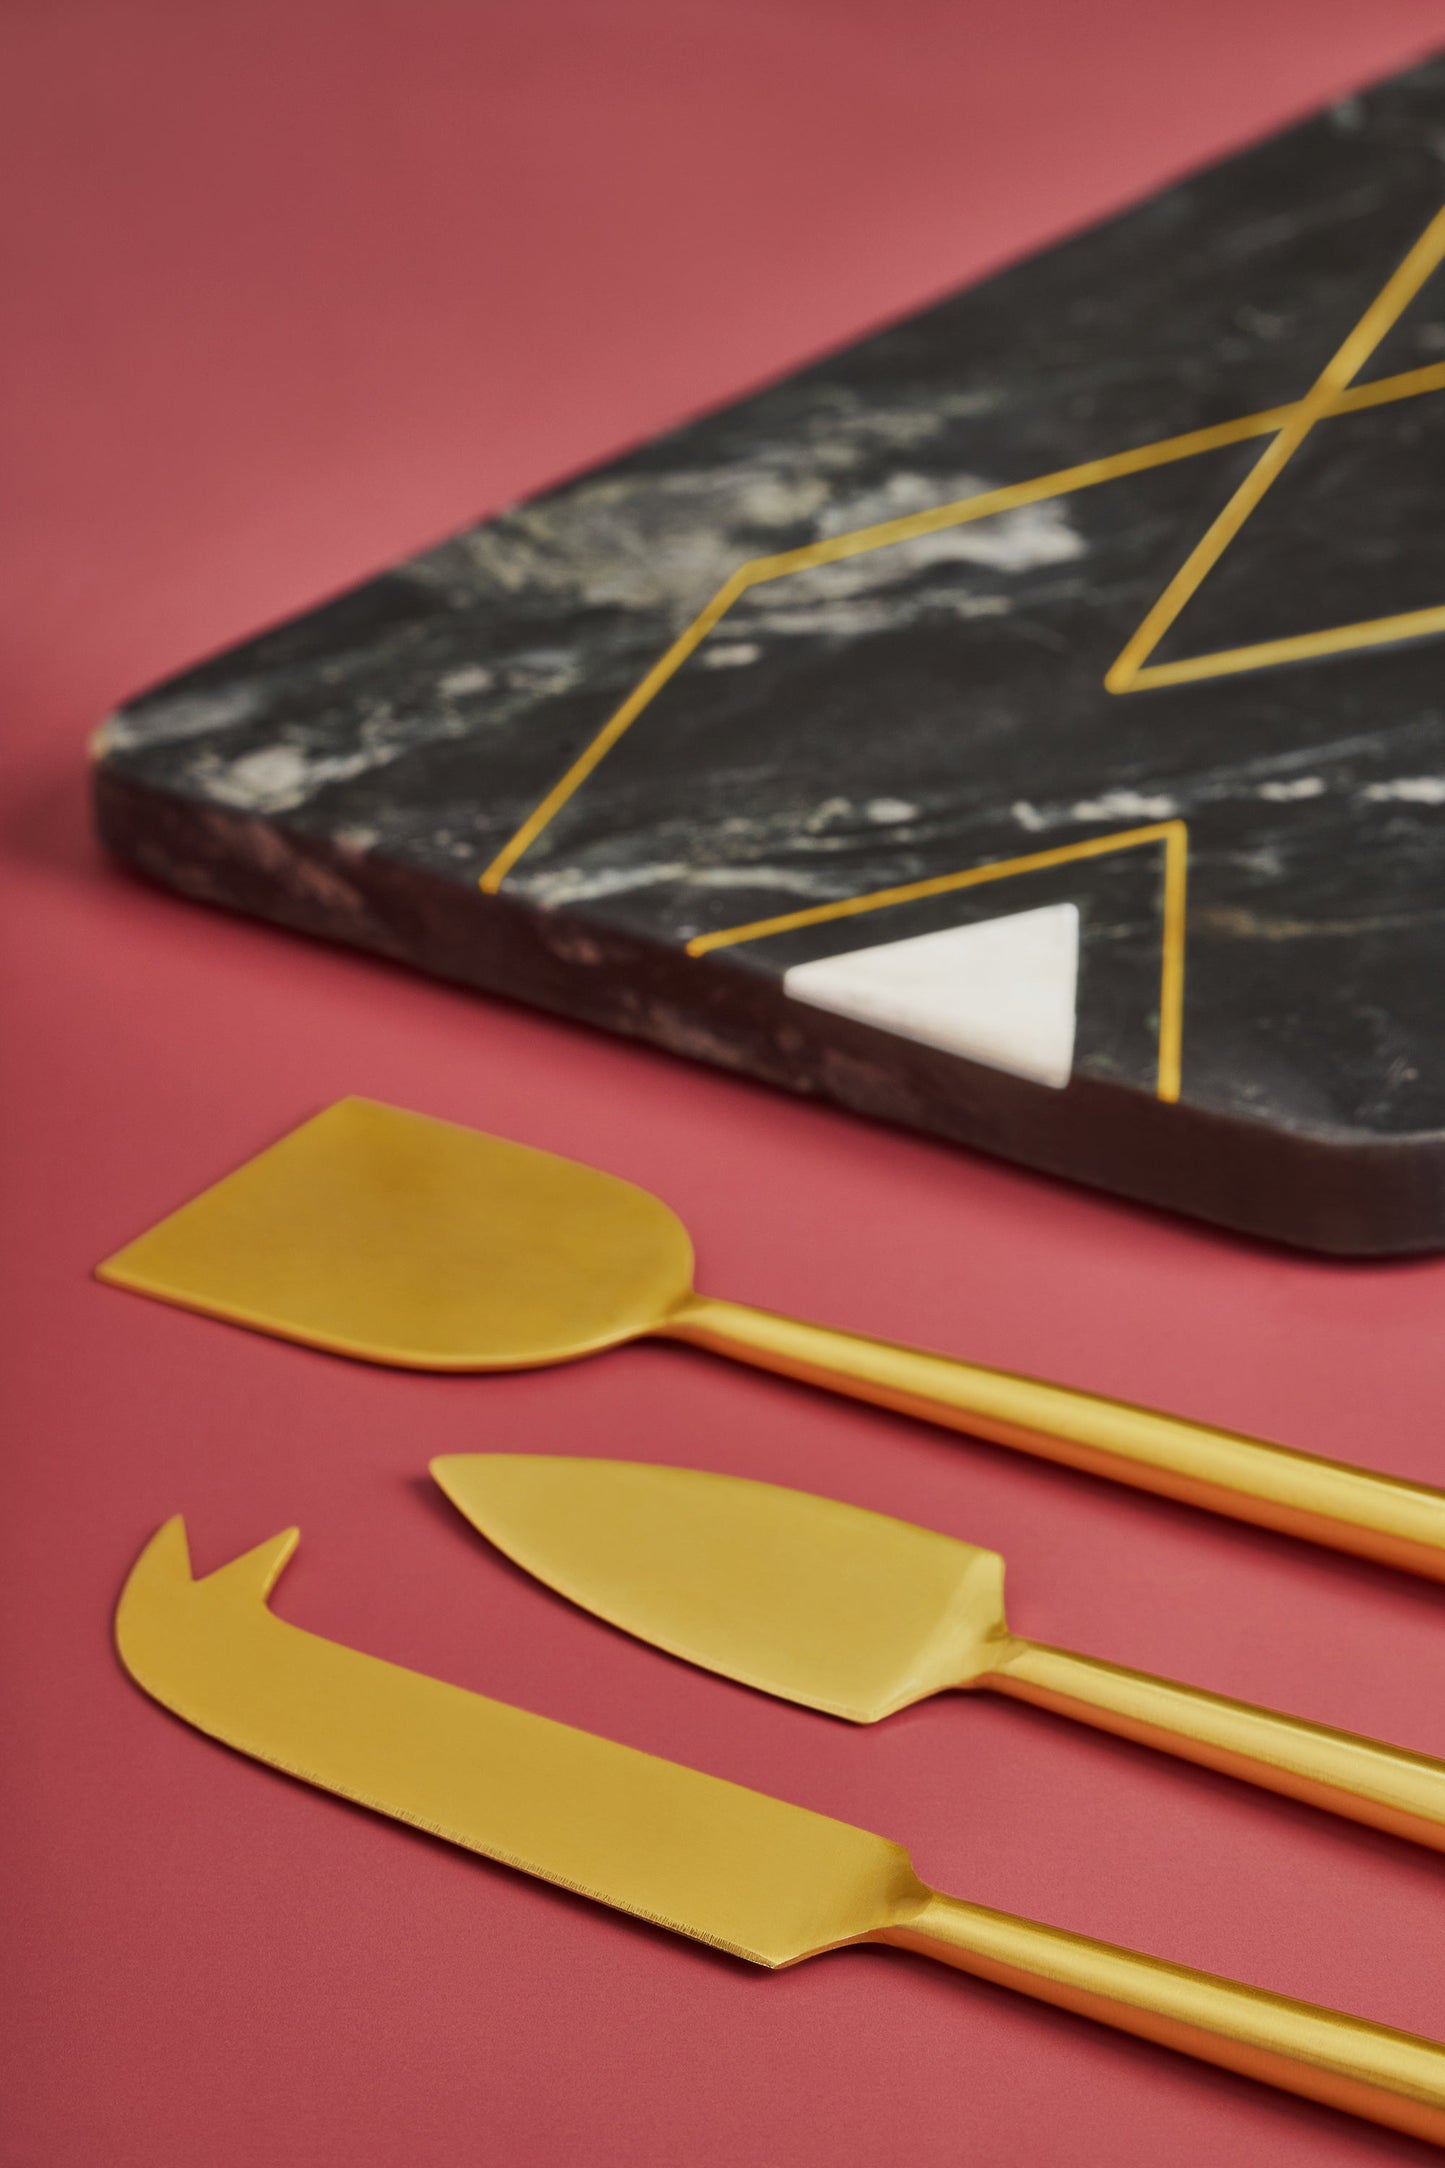 Ambrosia Marble Cheese Board with Knives